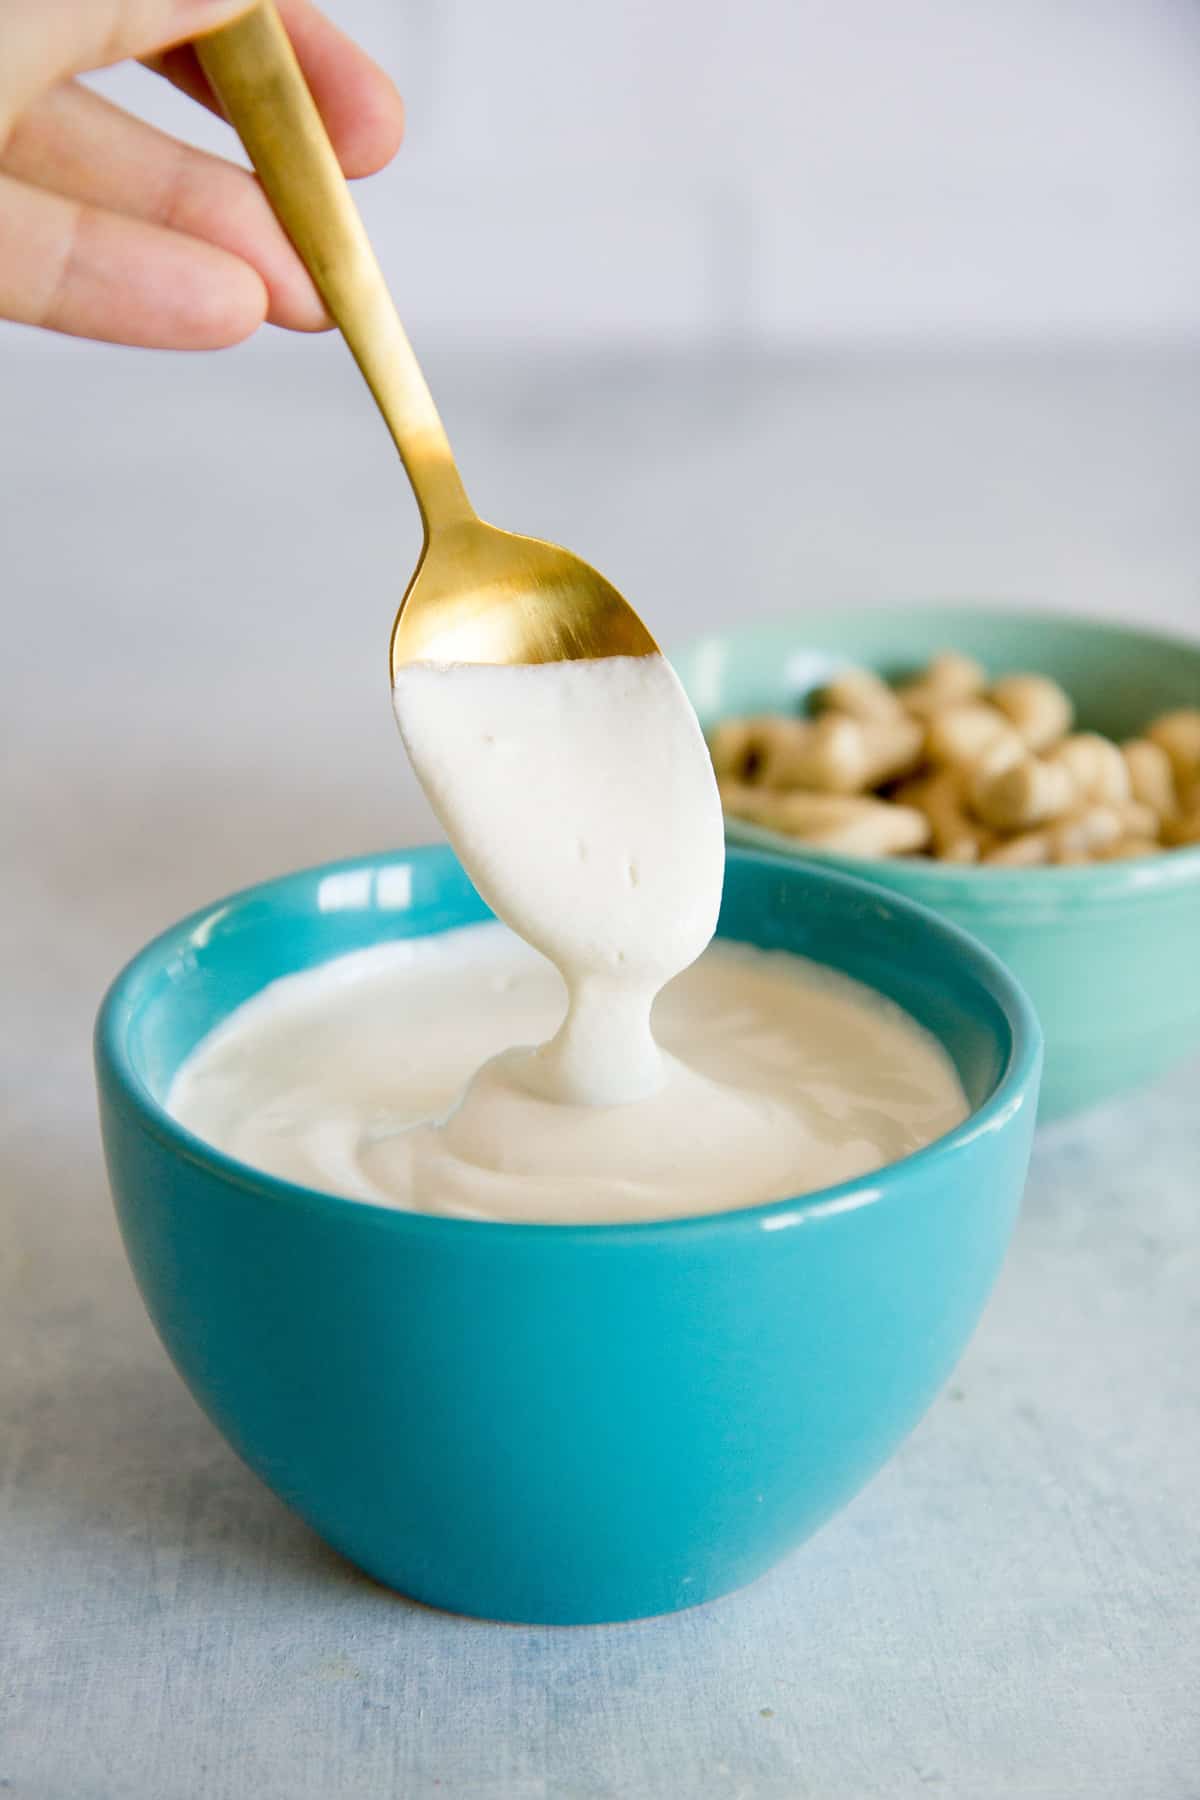 Spoon drizzling cashew cream into a turquoise bowl full of more cashew cream.